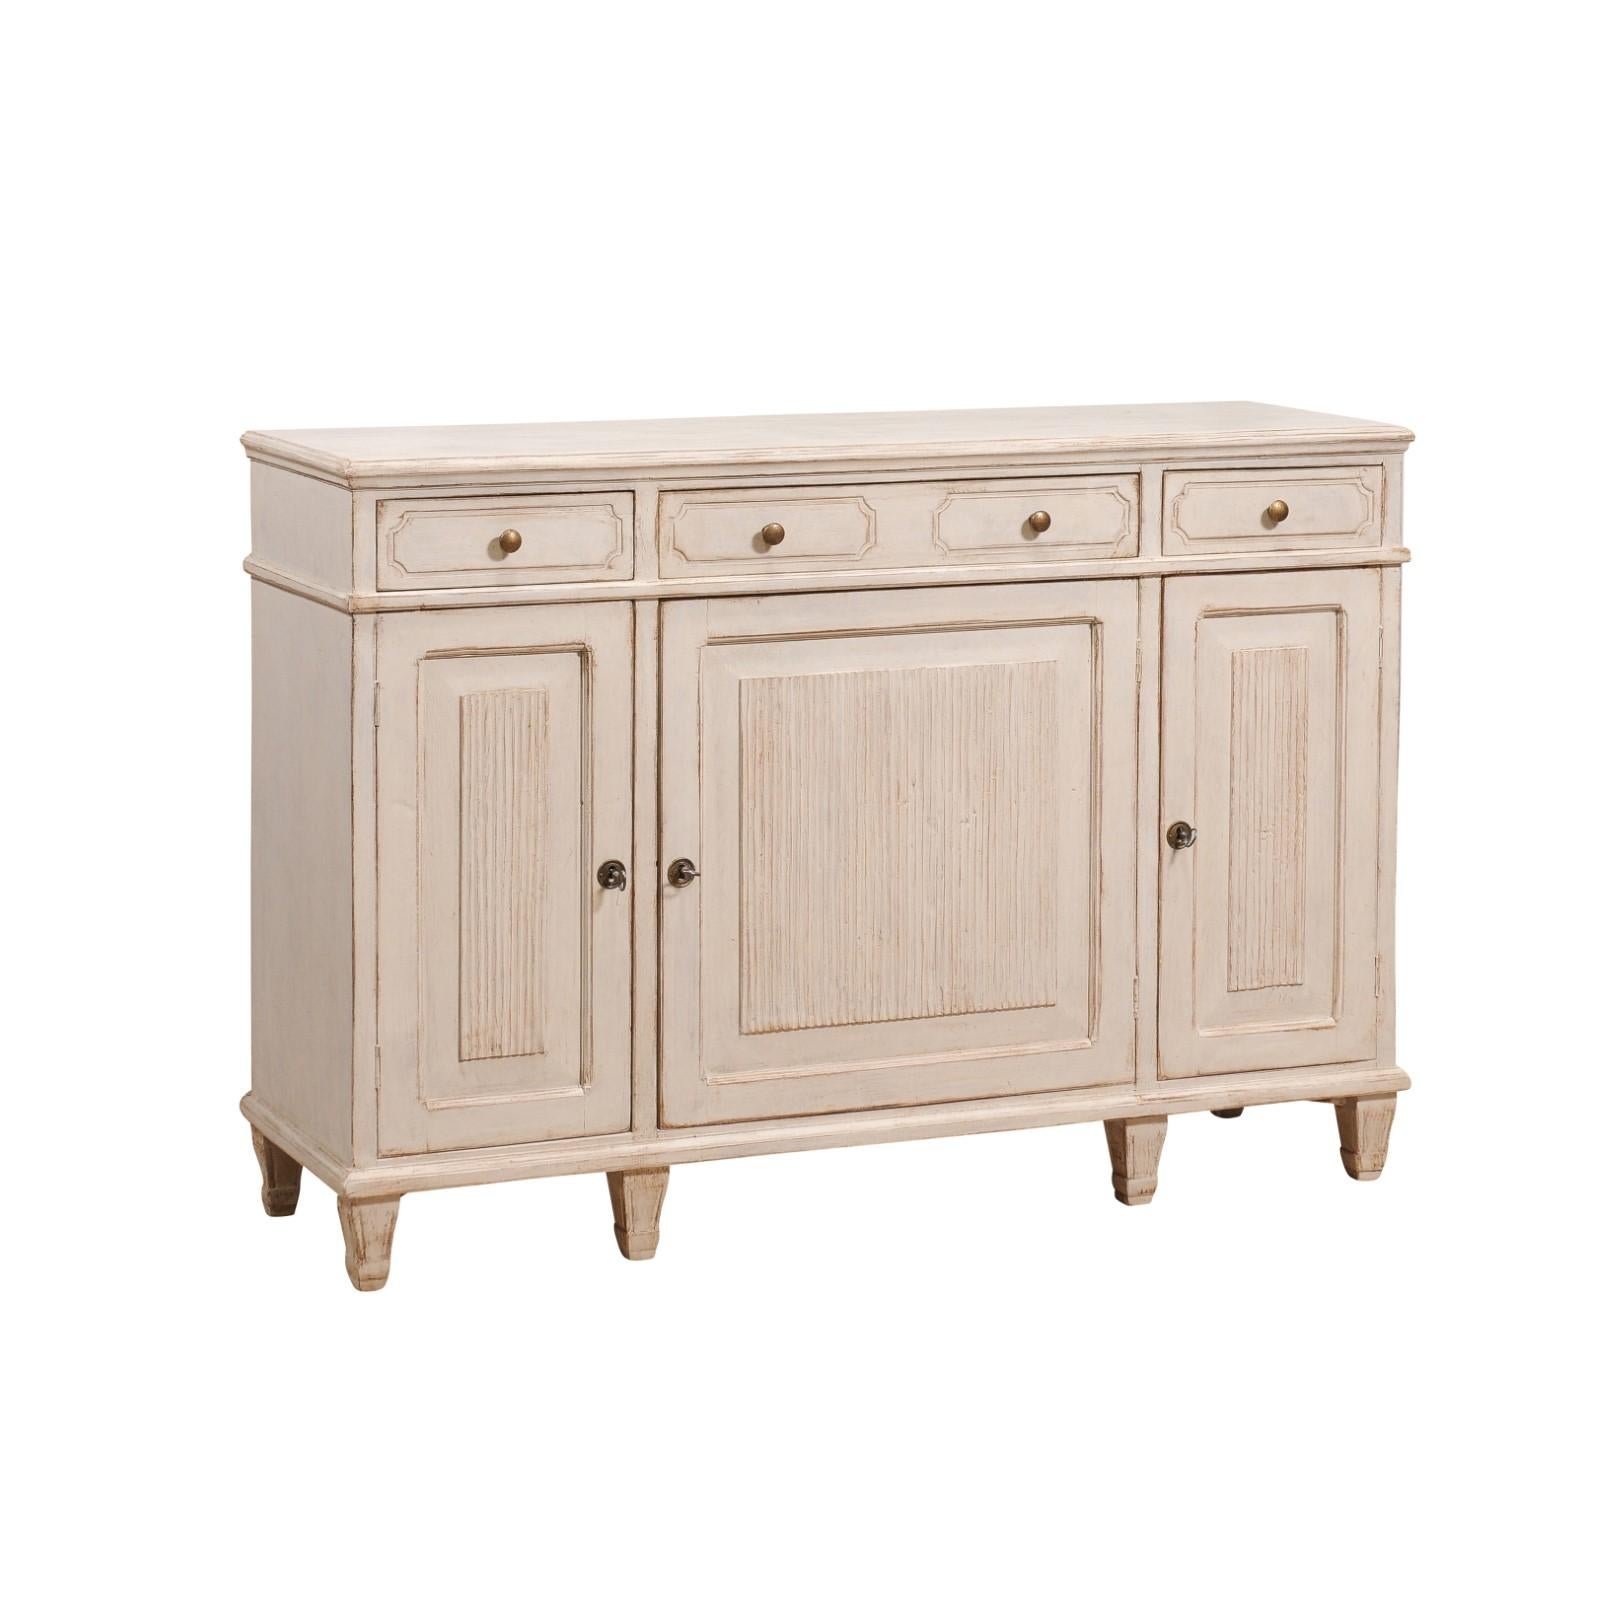 A Swedish Gustavian style sideboard from circa 1870 with three drawers over three doors, carved reeded motifs and light gray painted finish. This Swedish Gustavian style sideboard, dating back to circa 1870, is a splendid example of classic